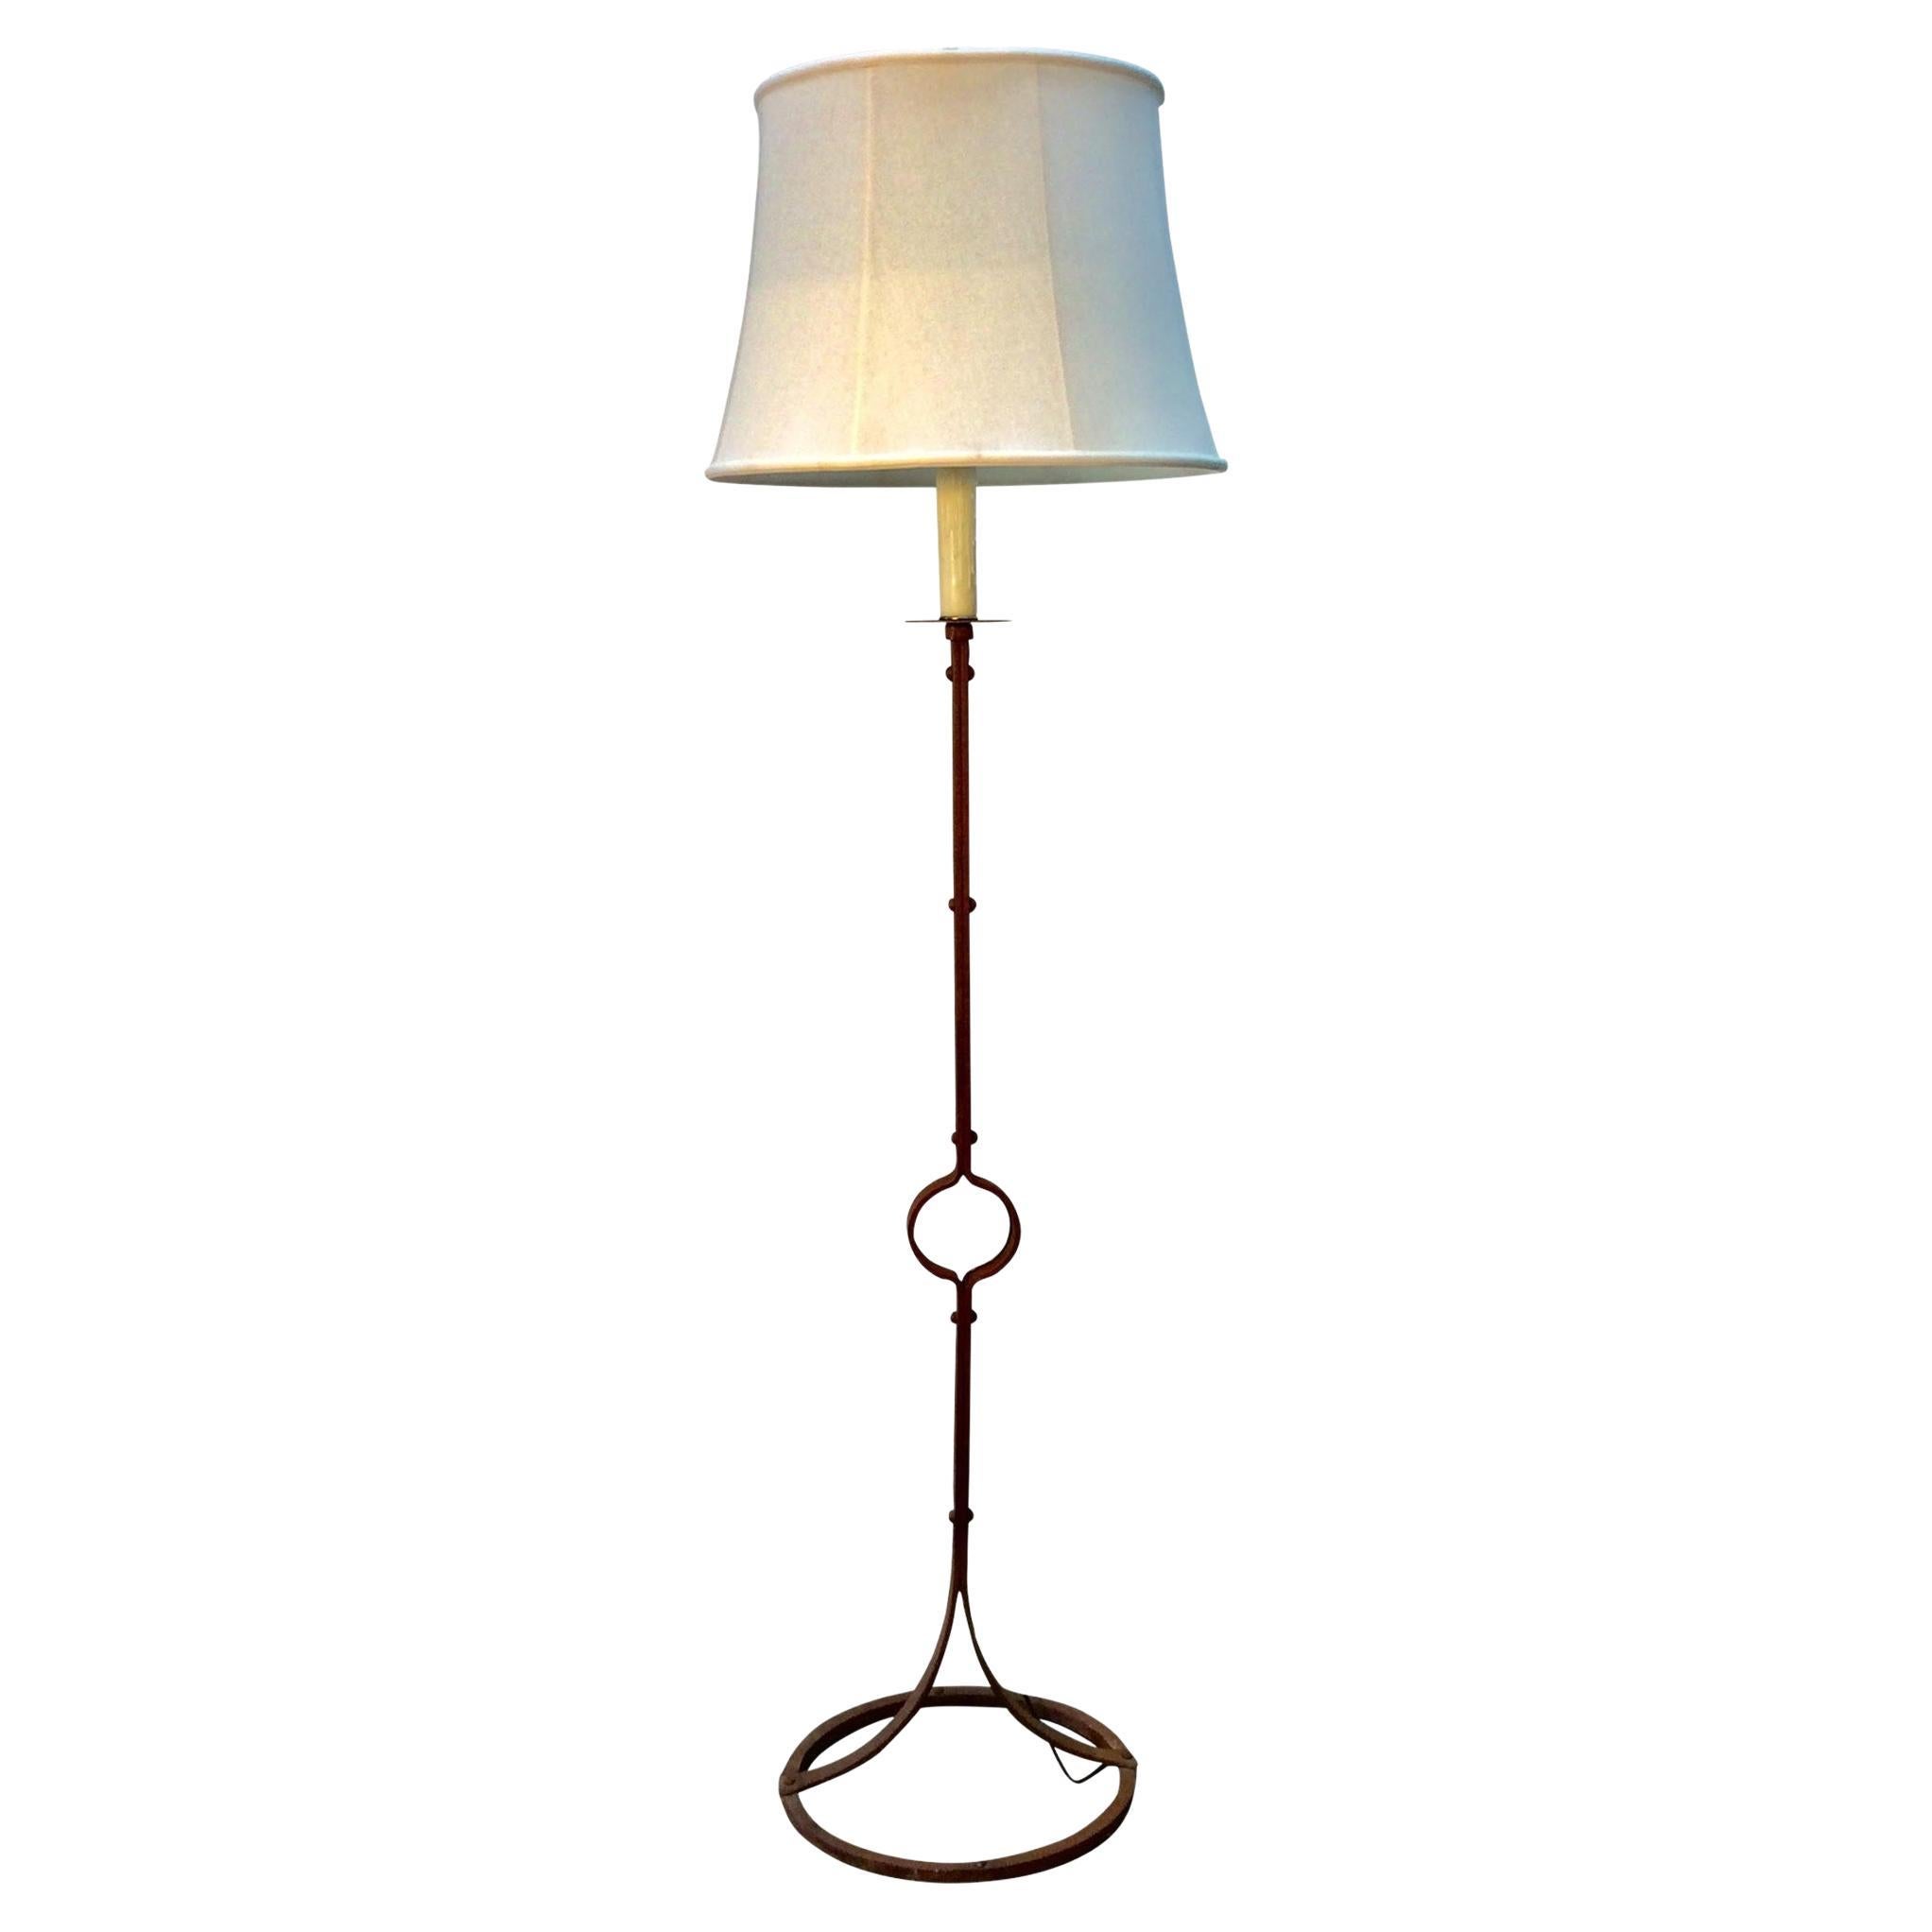 Early 20th Century French Iron Floor Lamp